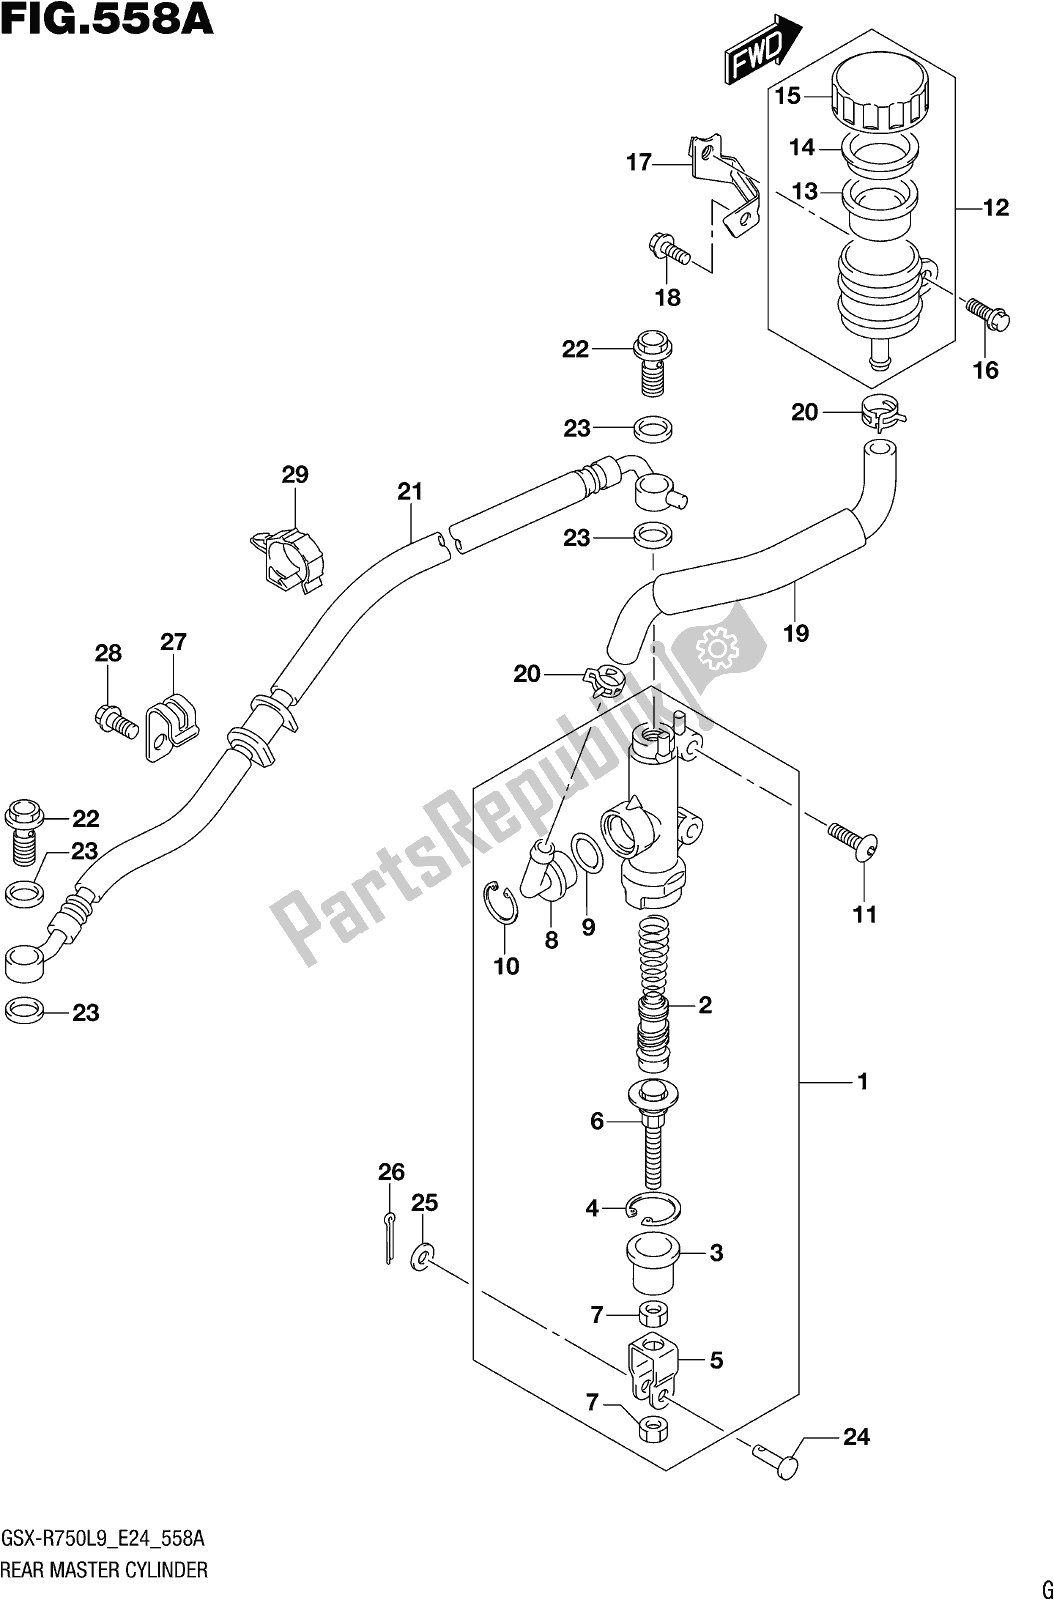 All parts for the Fig. 558a Rear Master Cylinder of the Suzuki Gsx-r 750 2019